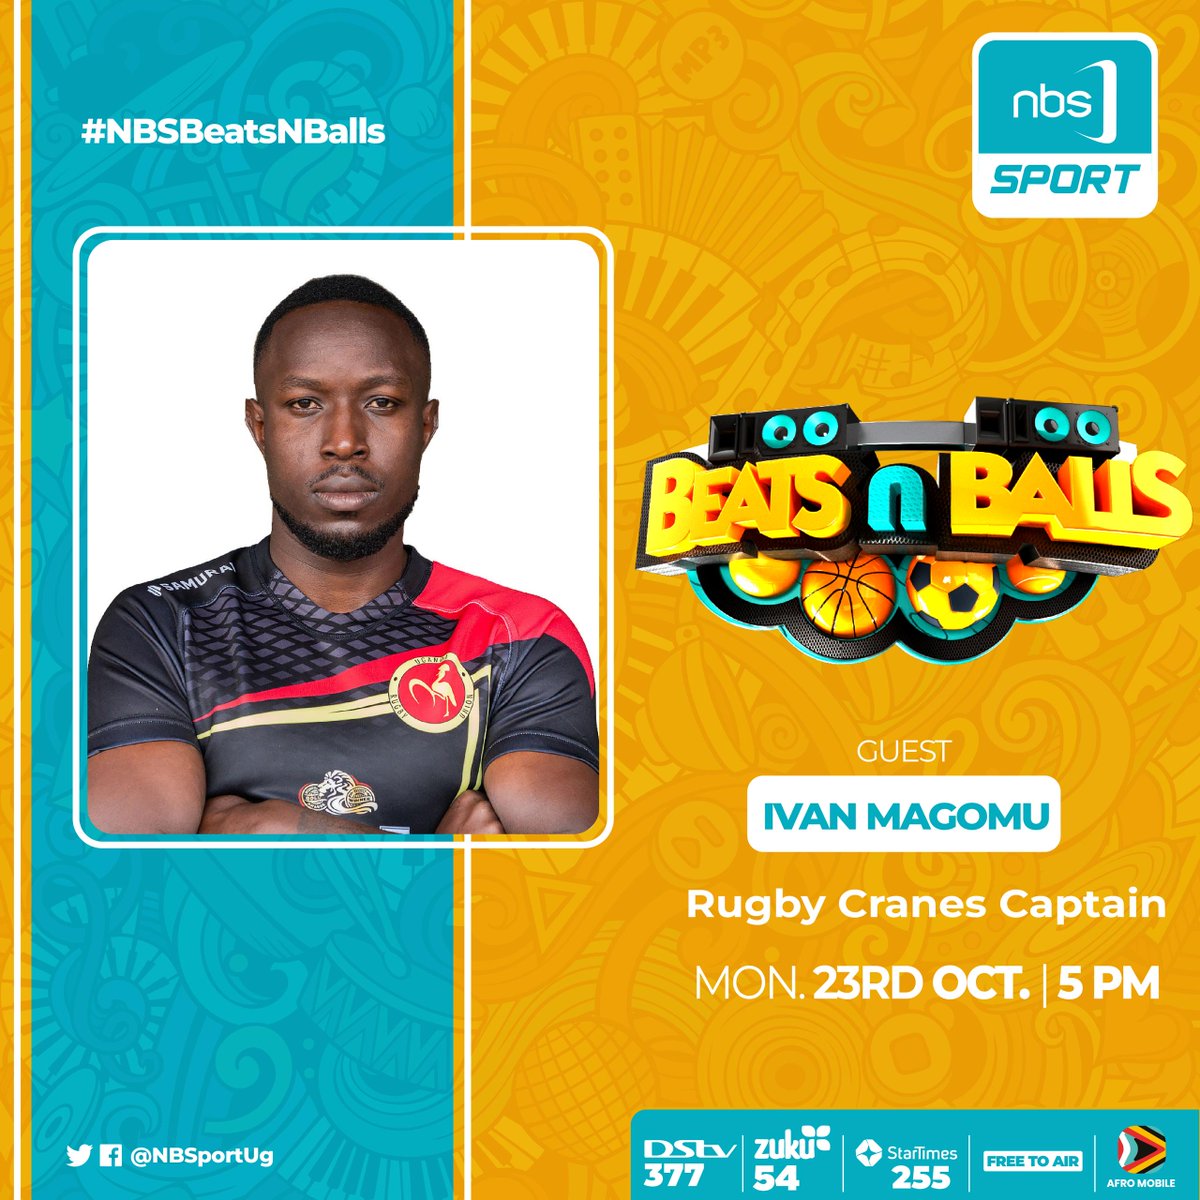 Our captain will be live on #NBSBeatsNBalls to discuss the #VictoriaCup2023.